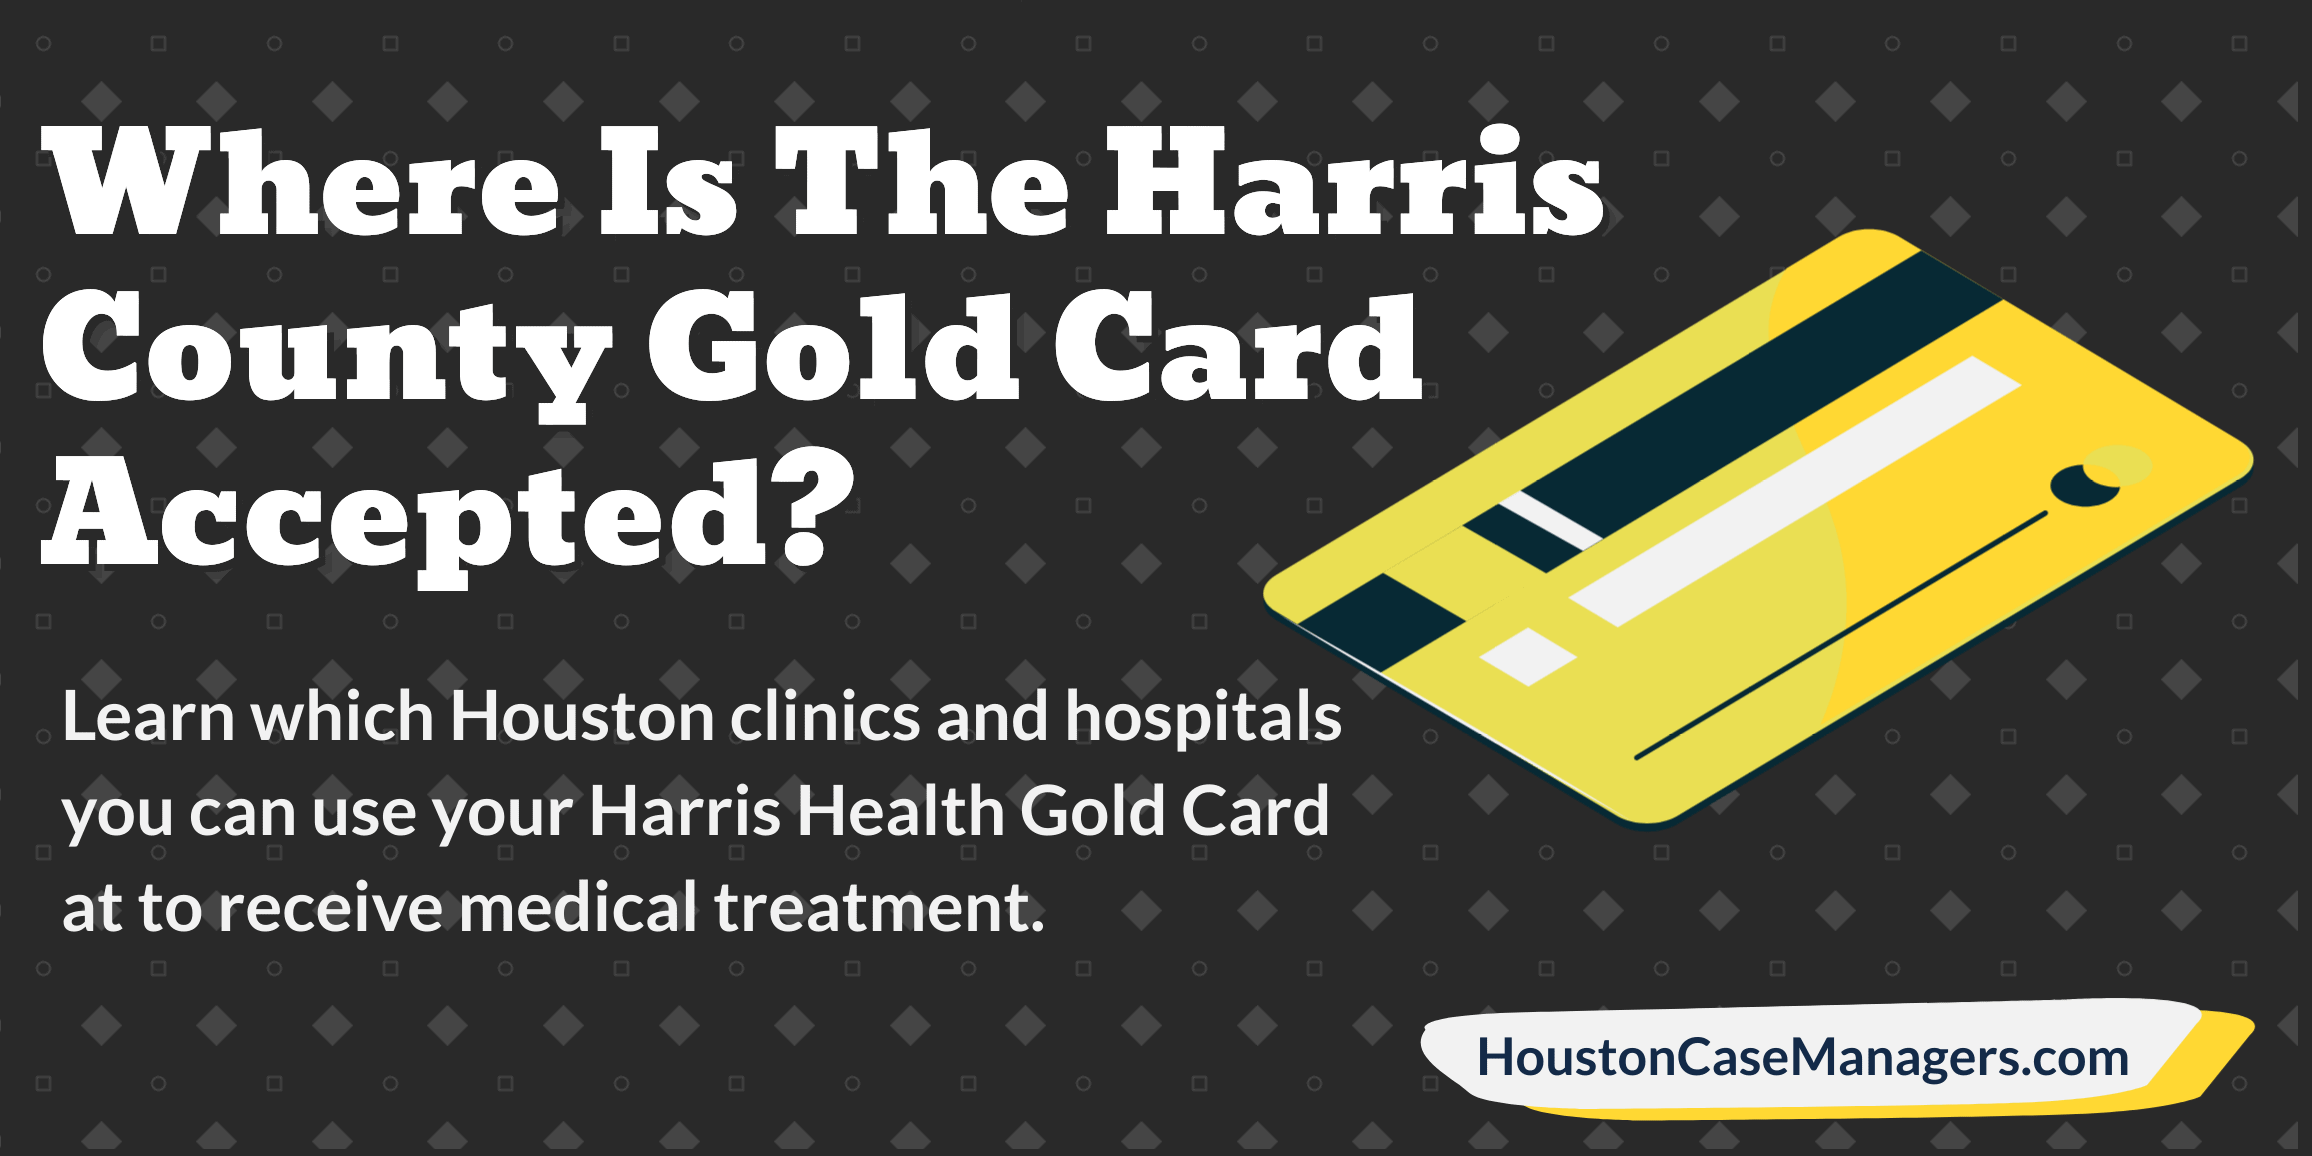 where is the harris county gold card accepted?